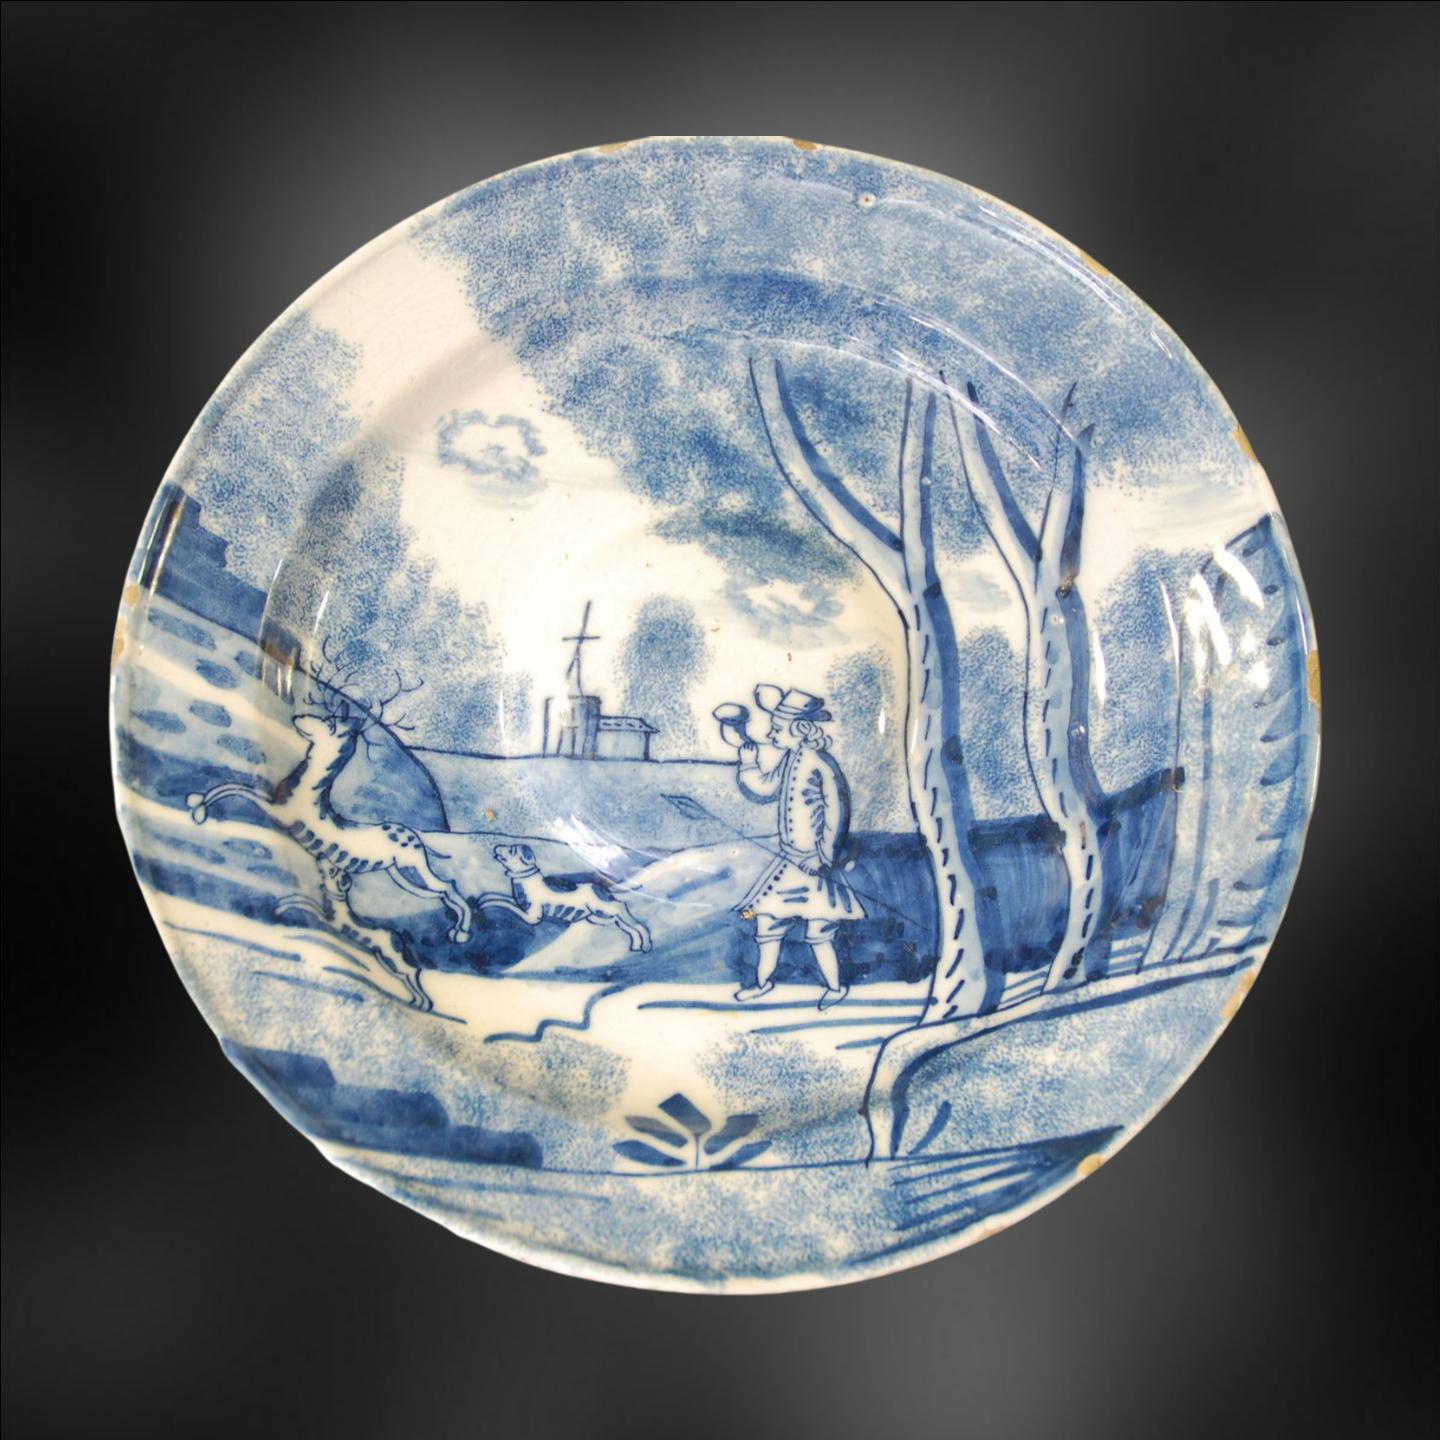 Tin glazed earthenware (Delftware) dish, in an unusual shape; elaborately and skillfully painted with a man coursing a stag. Probably London; perhaps Bristol. Probably the salver for a large ewer.

English Delftware is considered to be one of the